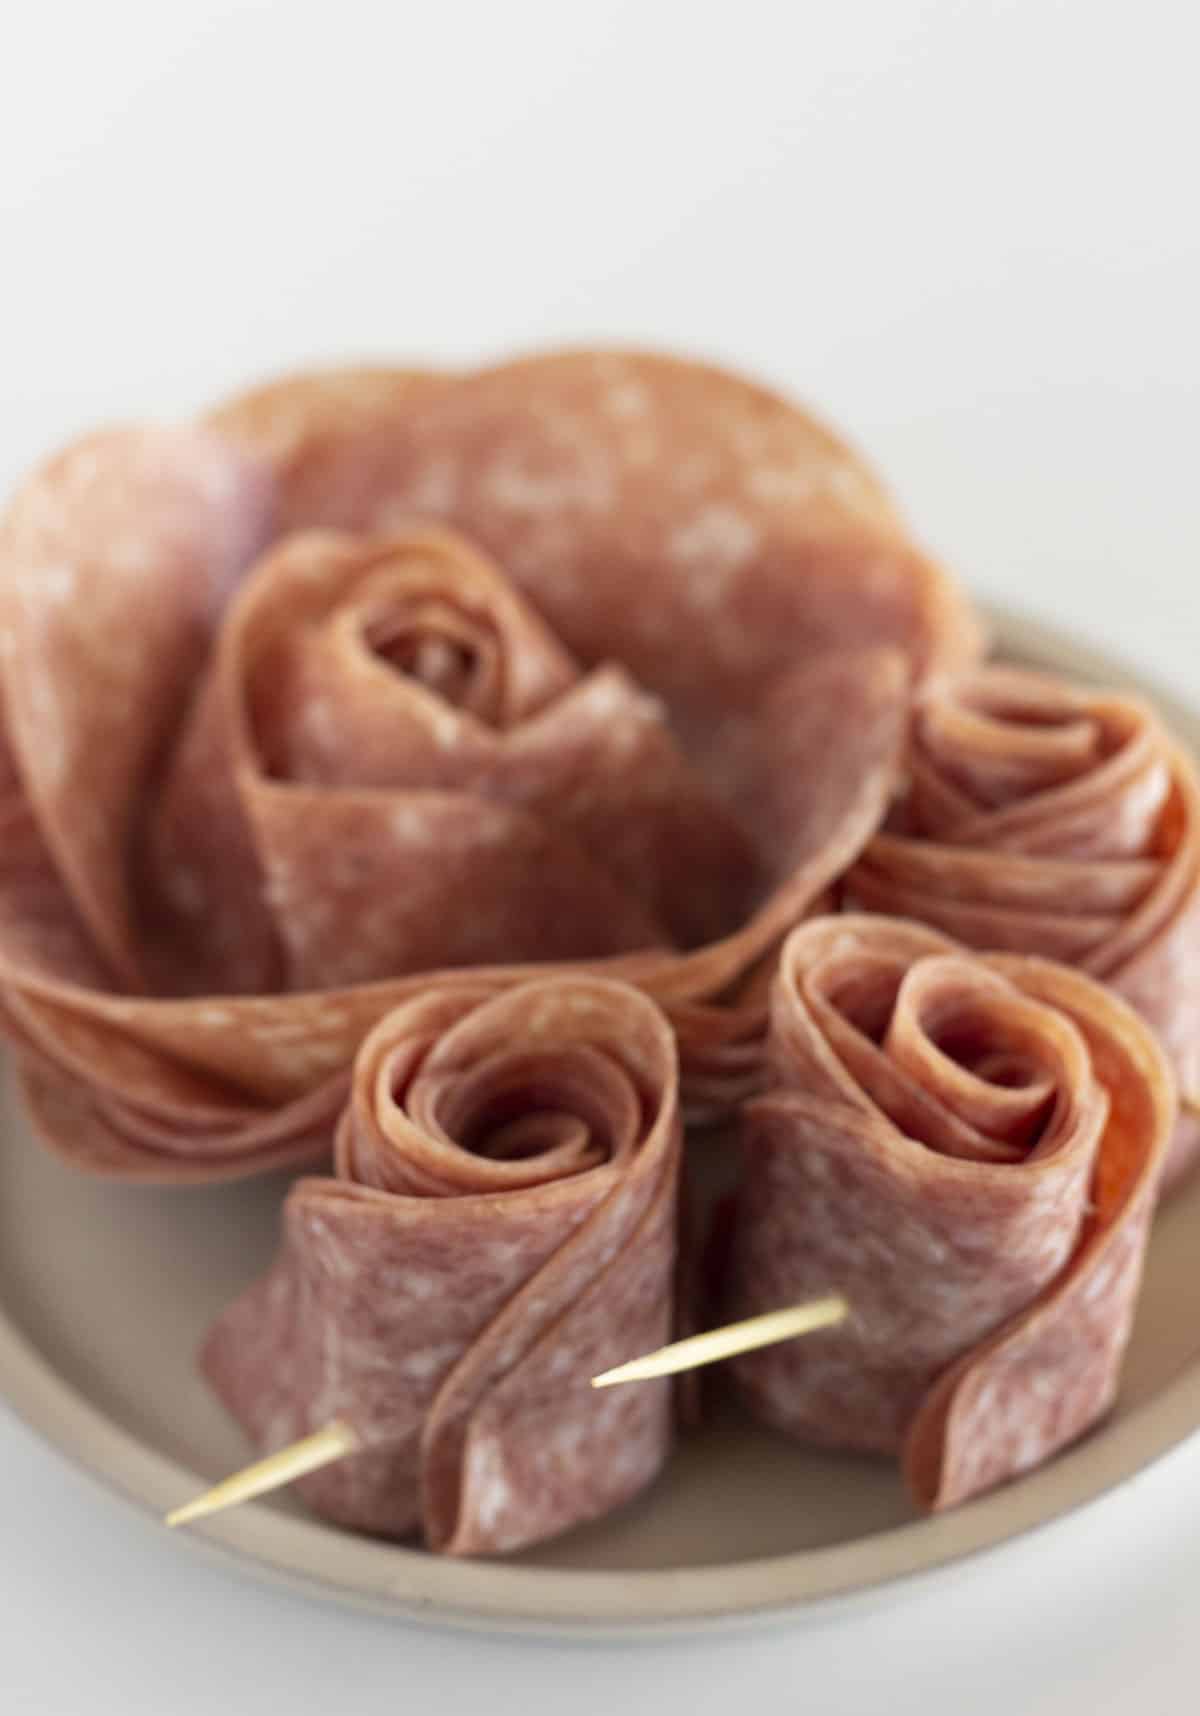 Salami roses on a white plate.